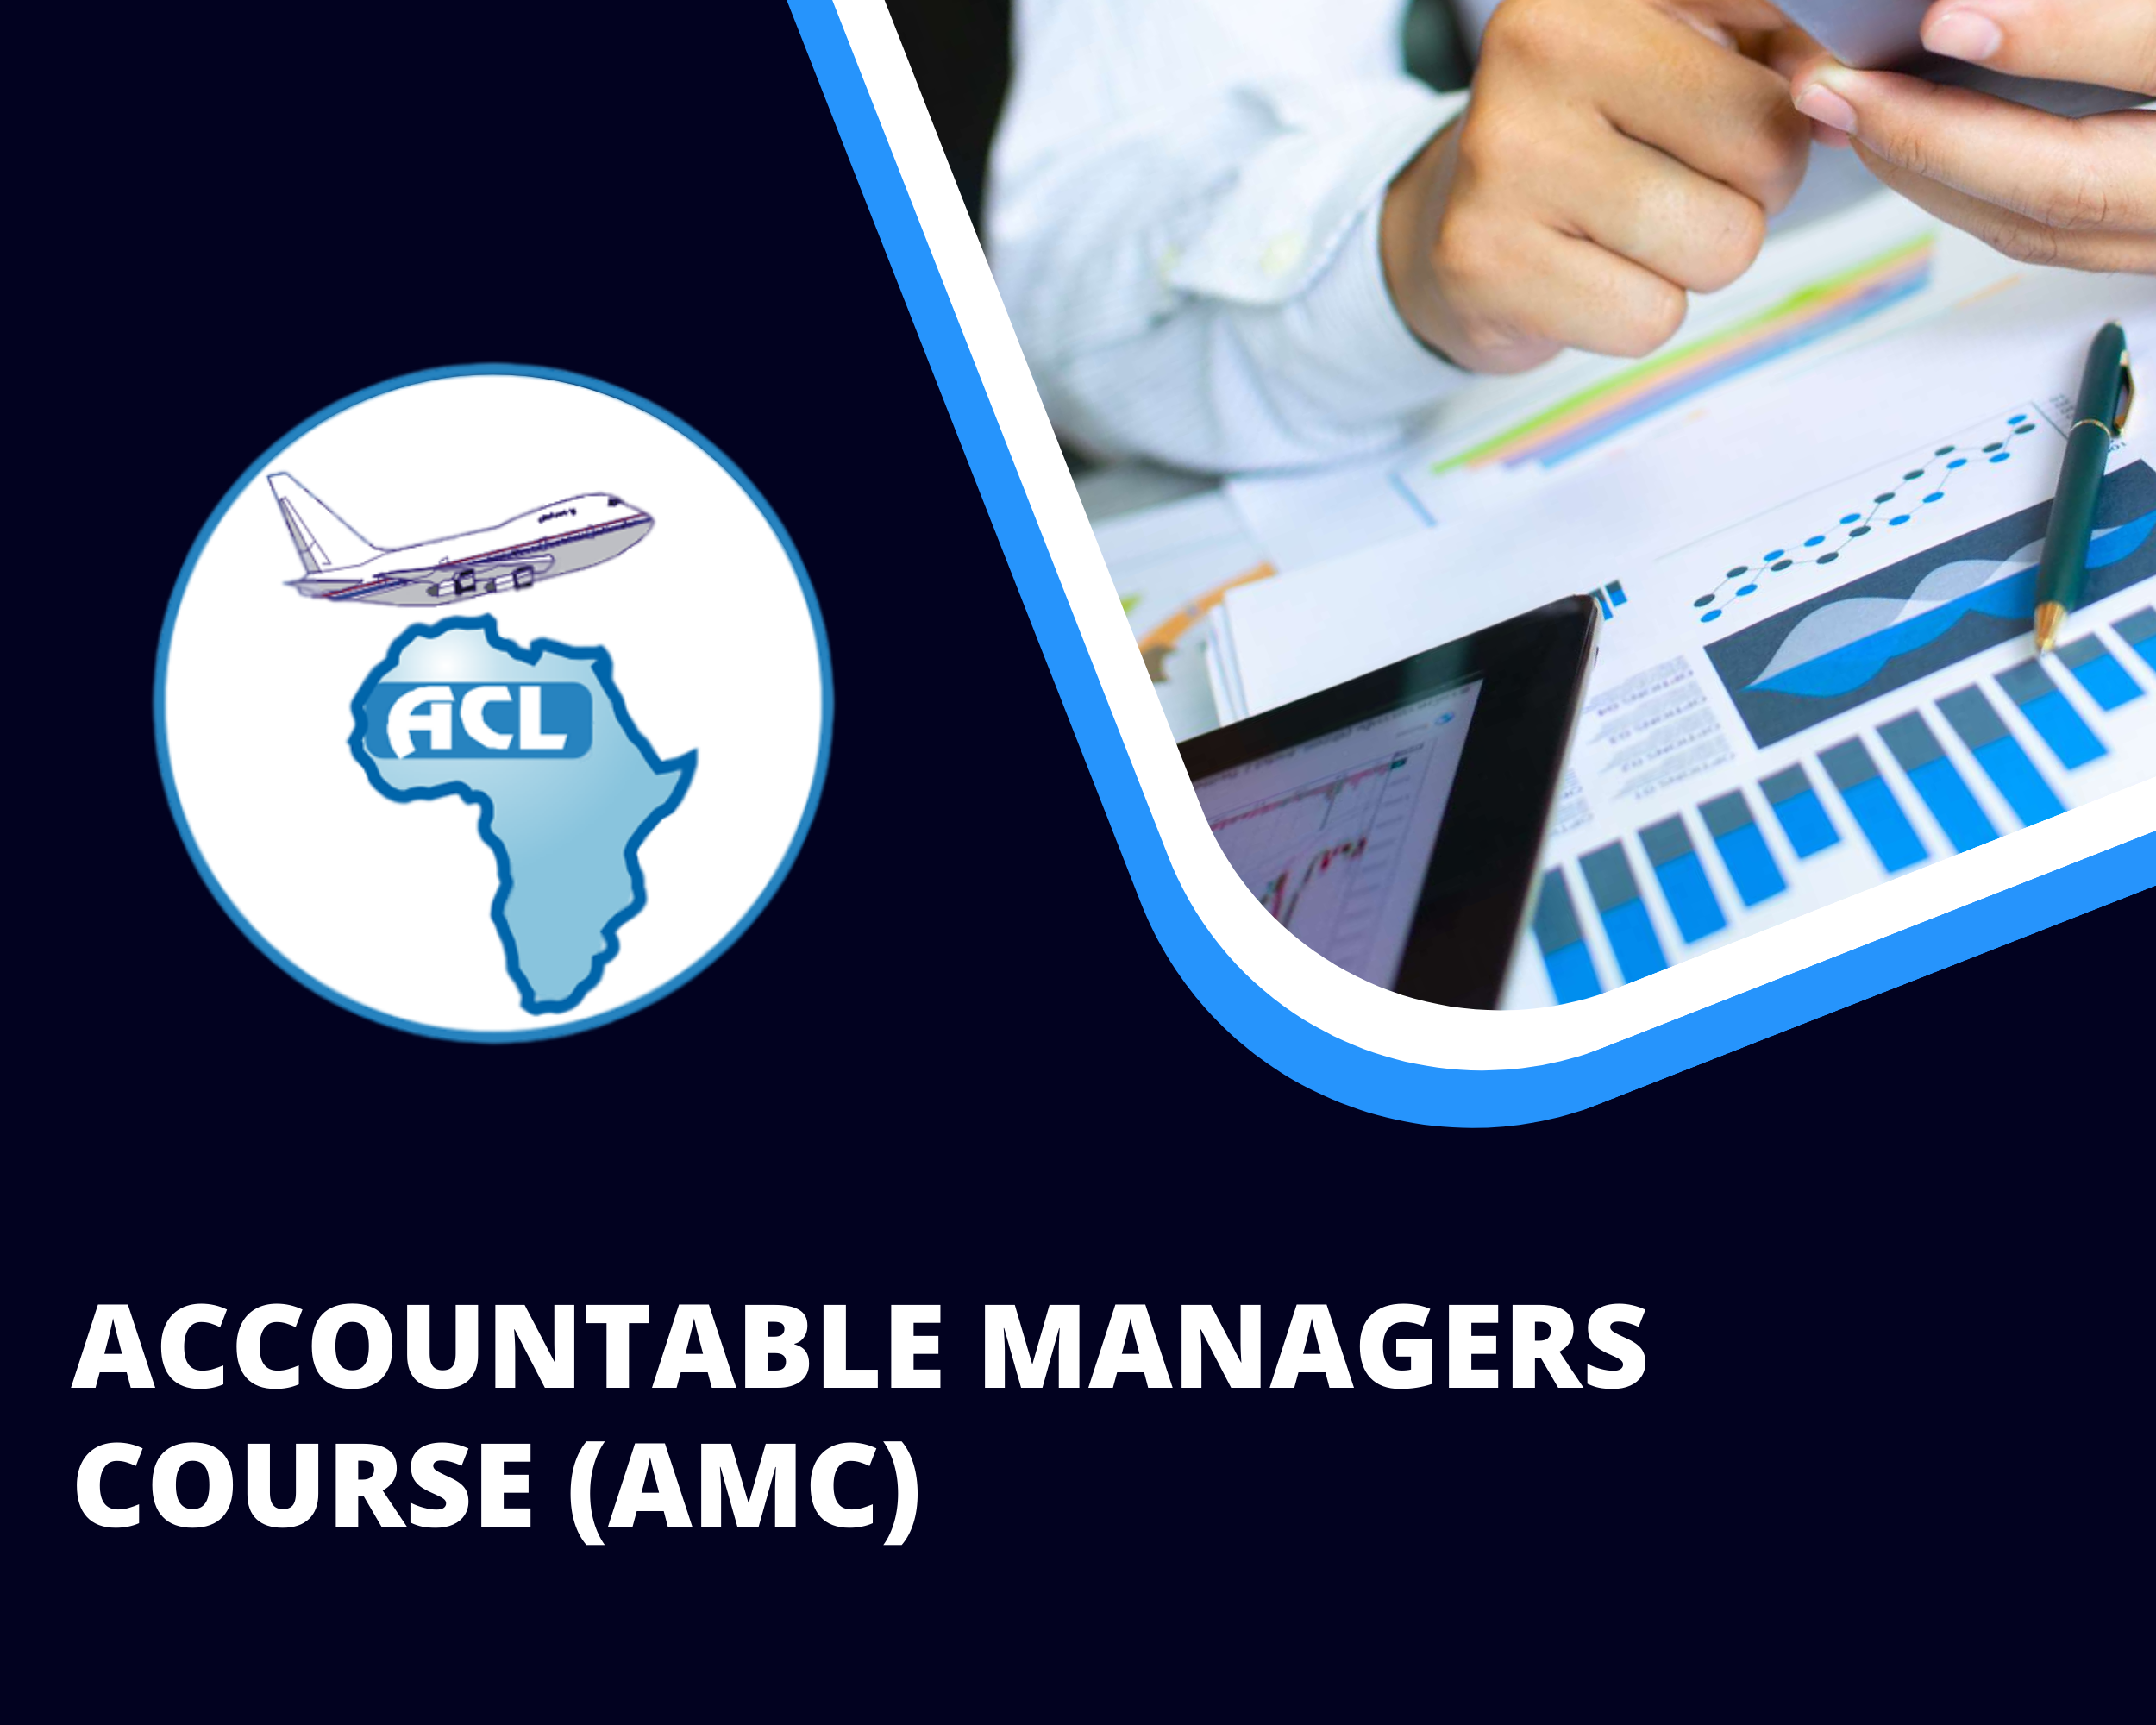 ACCOUNTABLE MANAGERS COURSE (AMC)